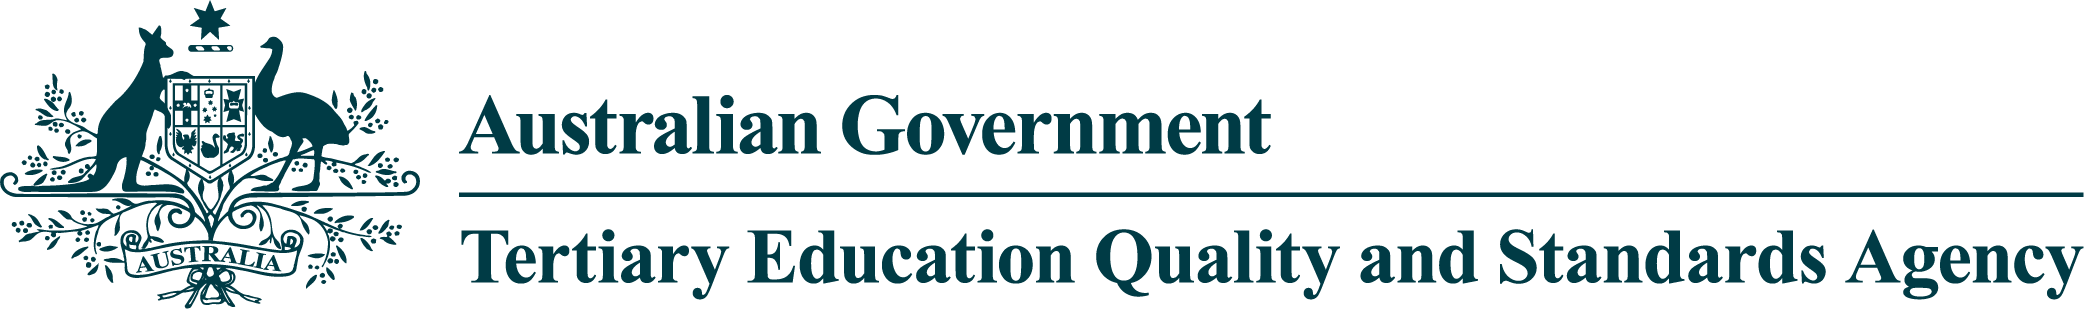 Tertiary Education Quality and Standards Agency Crest Navy logo